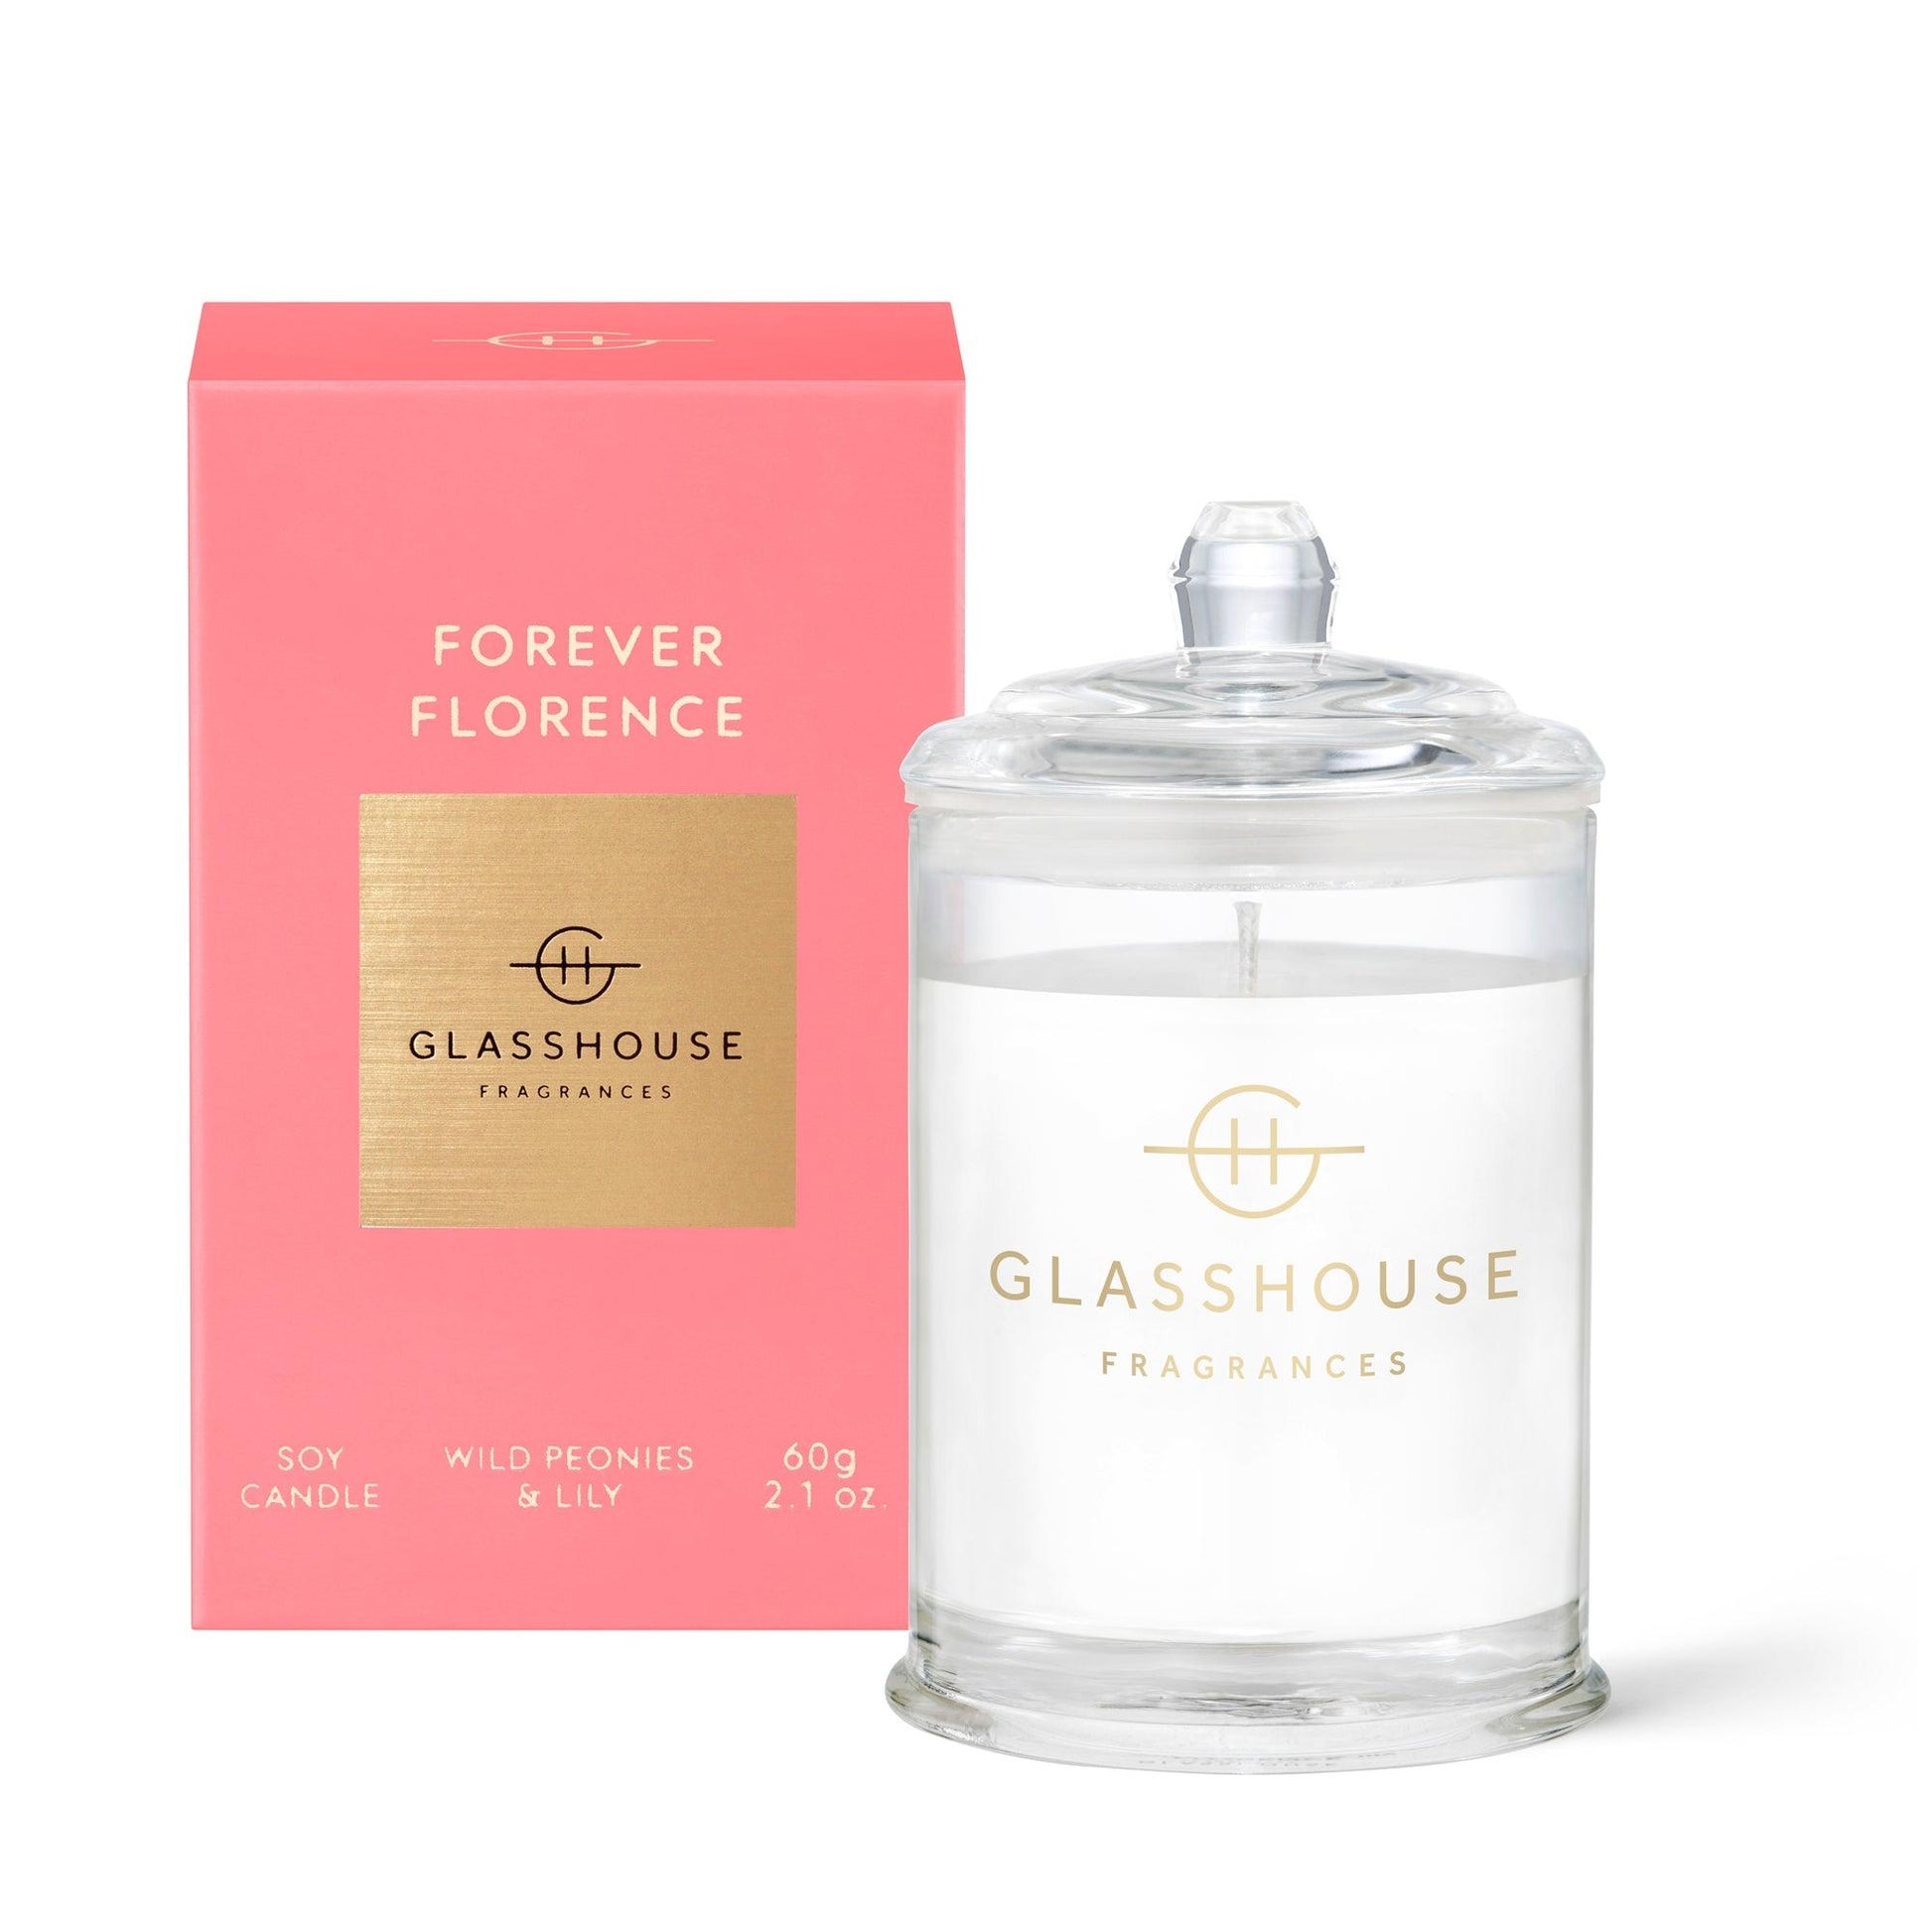 GF 760g FOREVER FLORENCE Candle - Handworks Nouveau Paperie